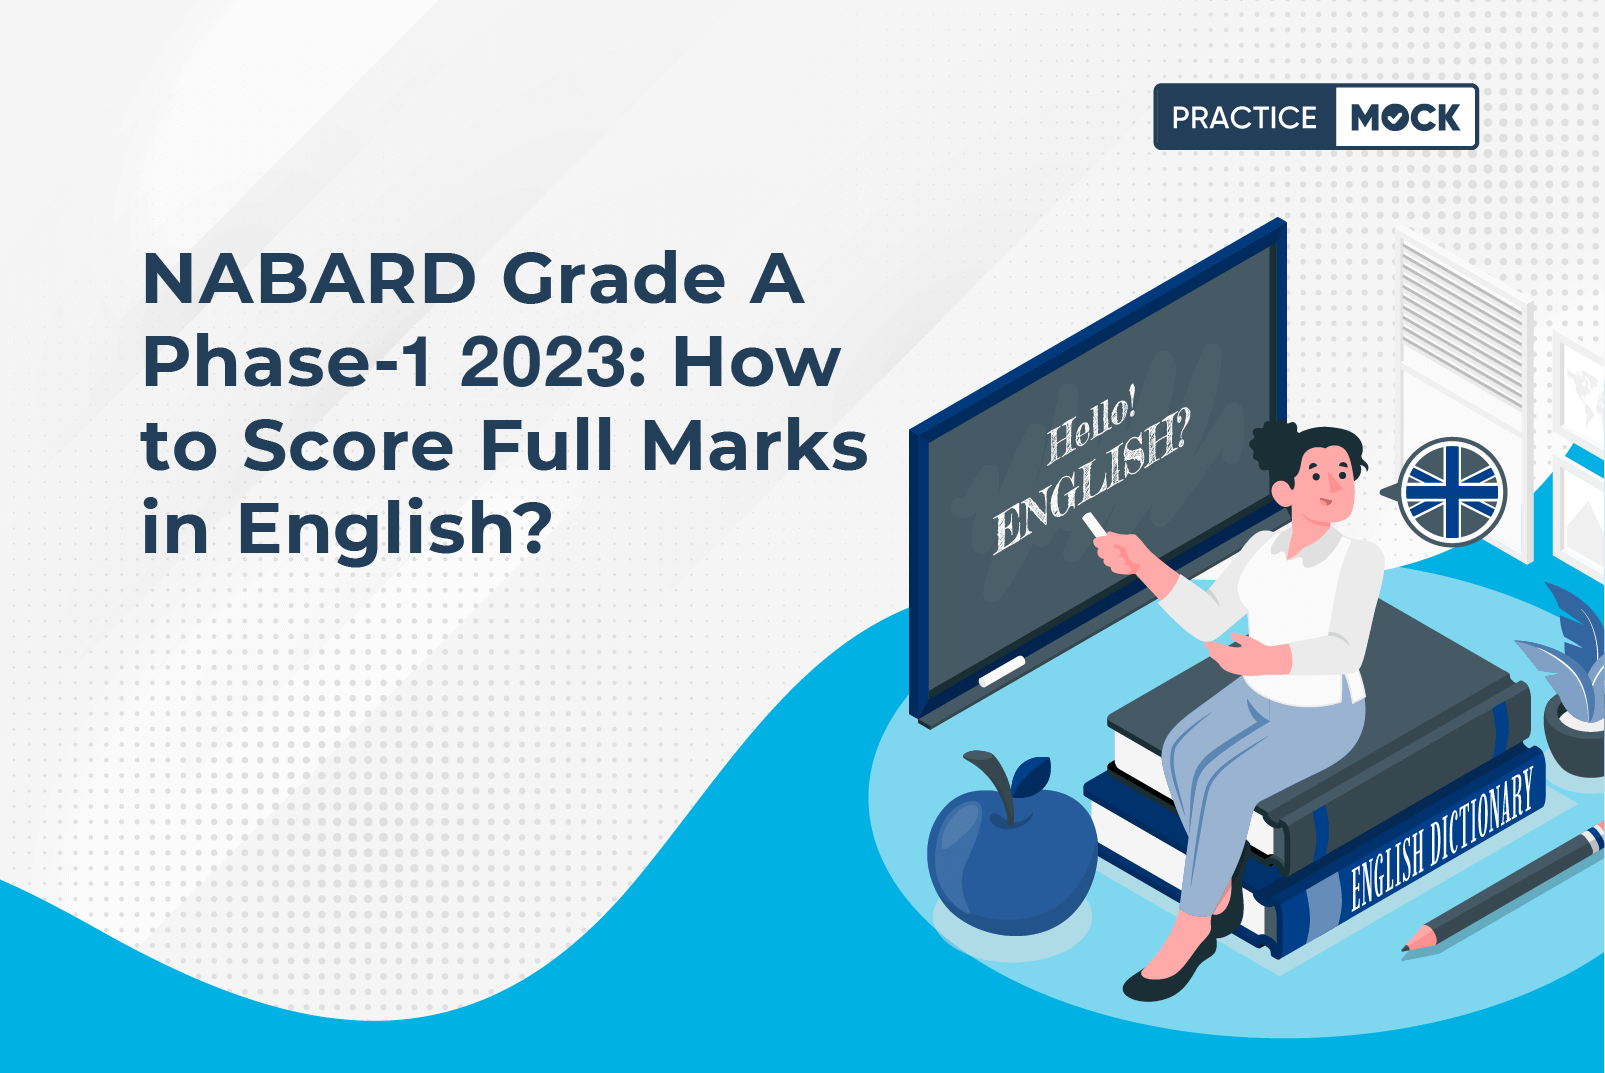 NABARD Grade A Phase 1 2023-How to Score Full Marks in English?